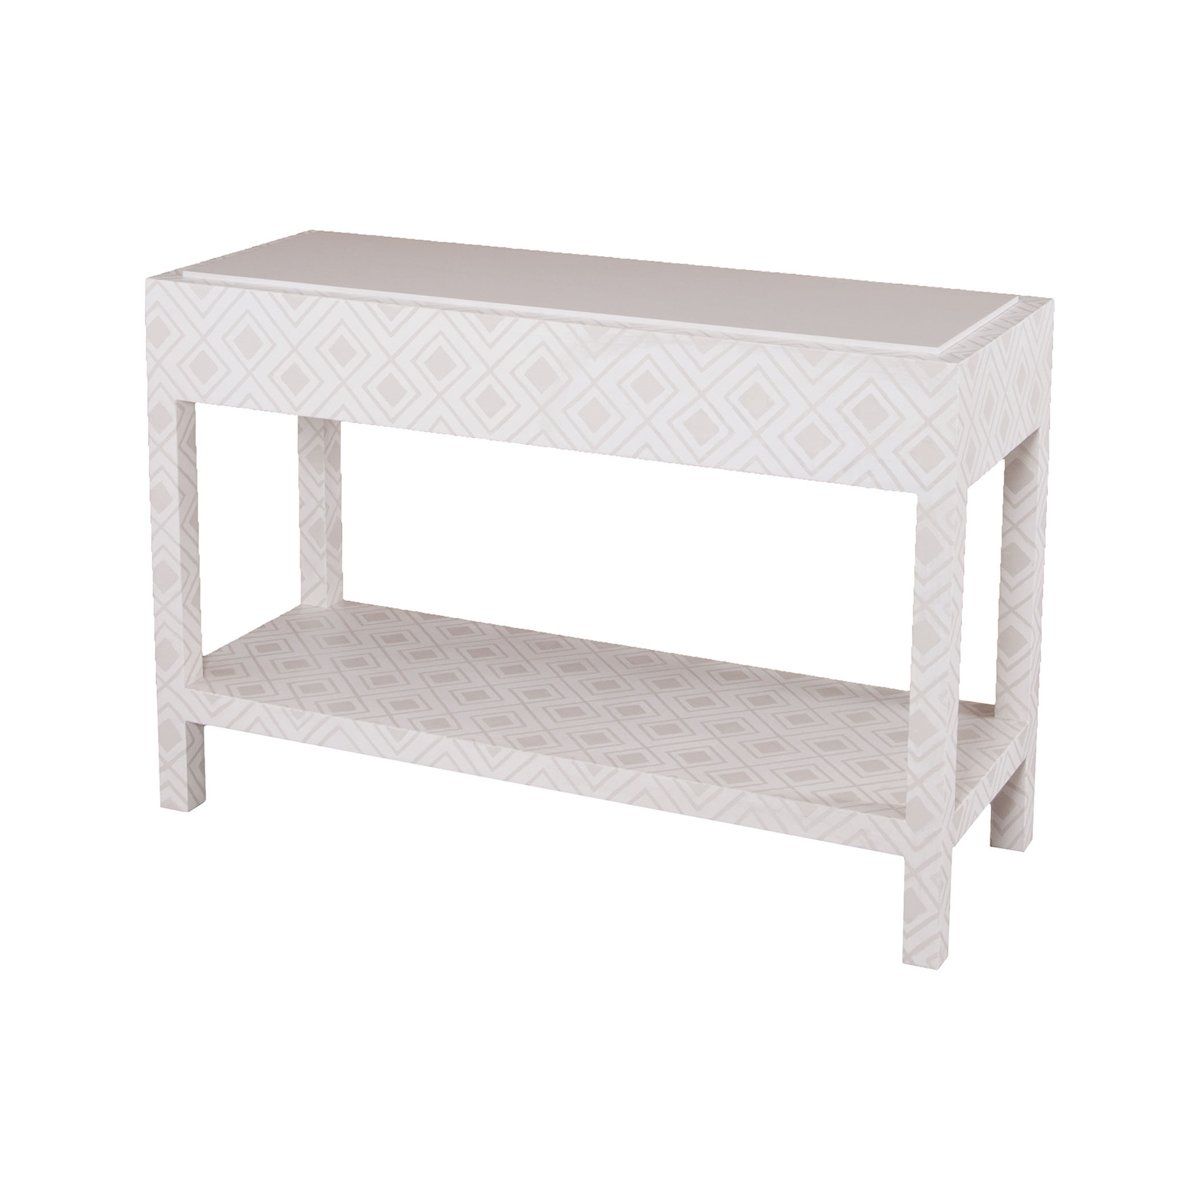 Kent Fabric Wrapped Console | Products In 2018 | Pinterest Within Parsons Concrete Top &amp; Elm Base 48x16 Console Tables (View 8 of 30)